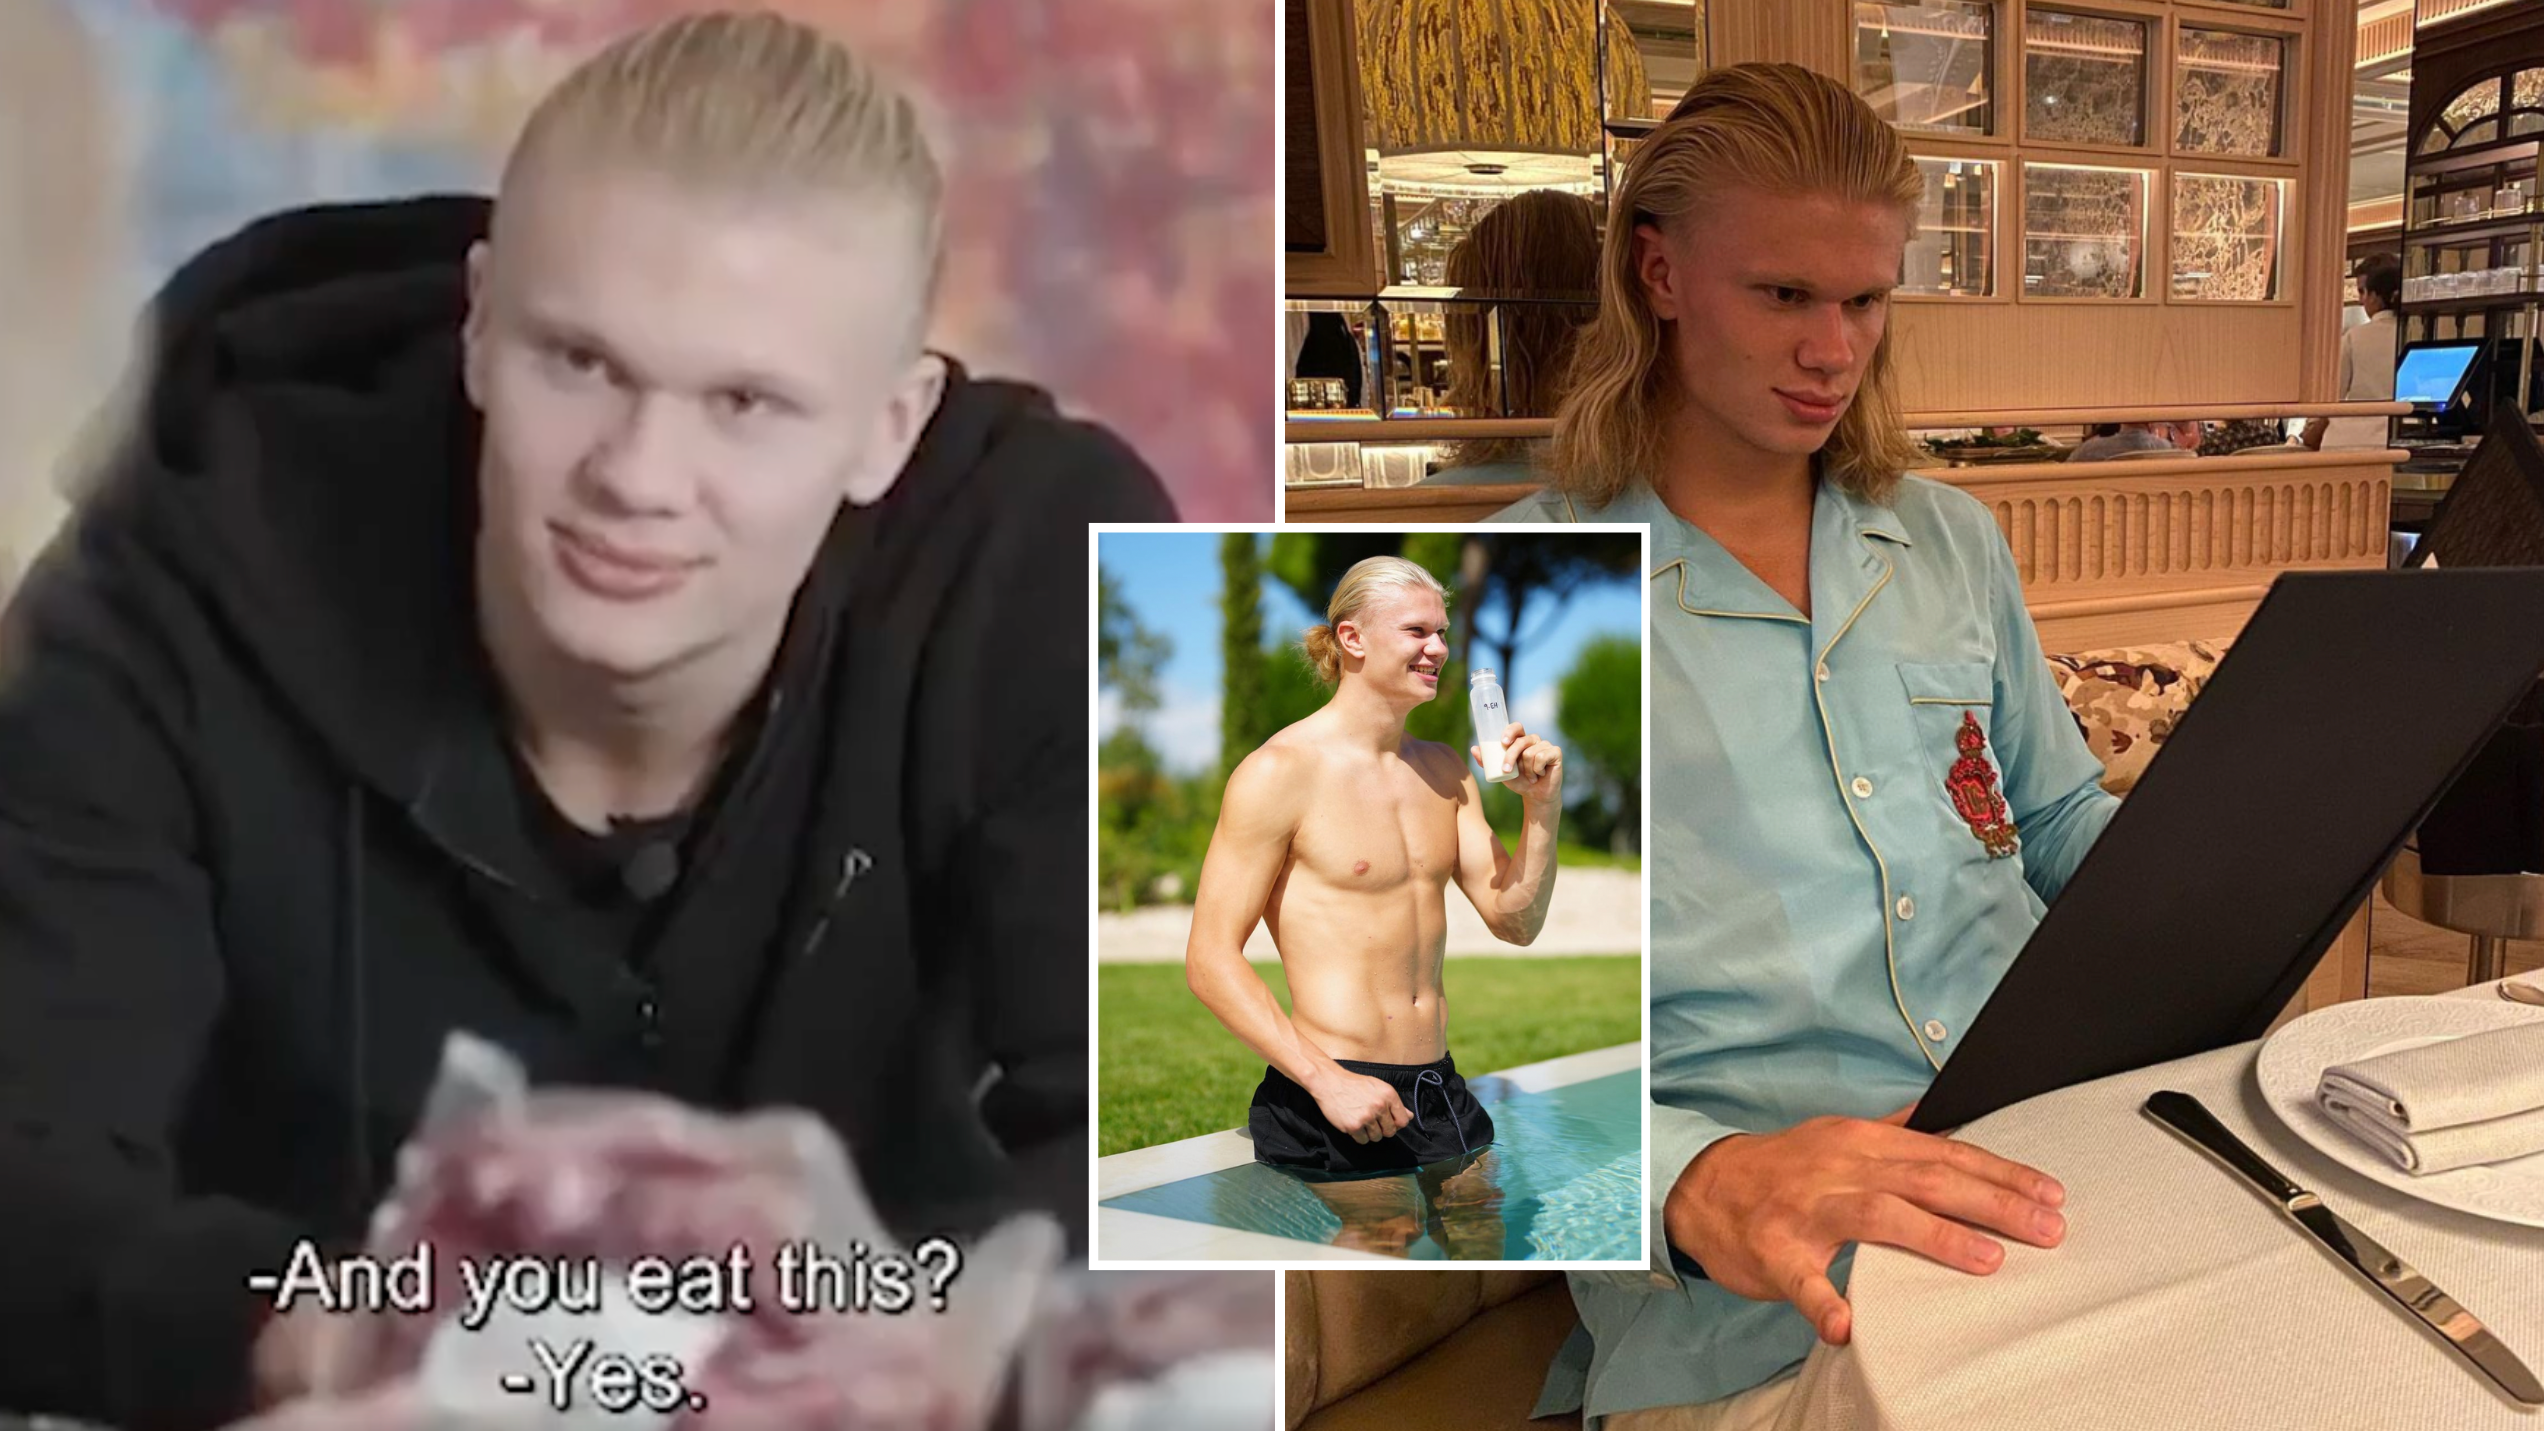 Erling Haaland has extreme diet full of food 'other people don't eat' to tát  become world's best striker